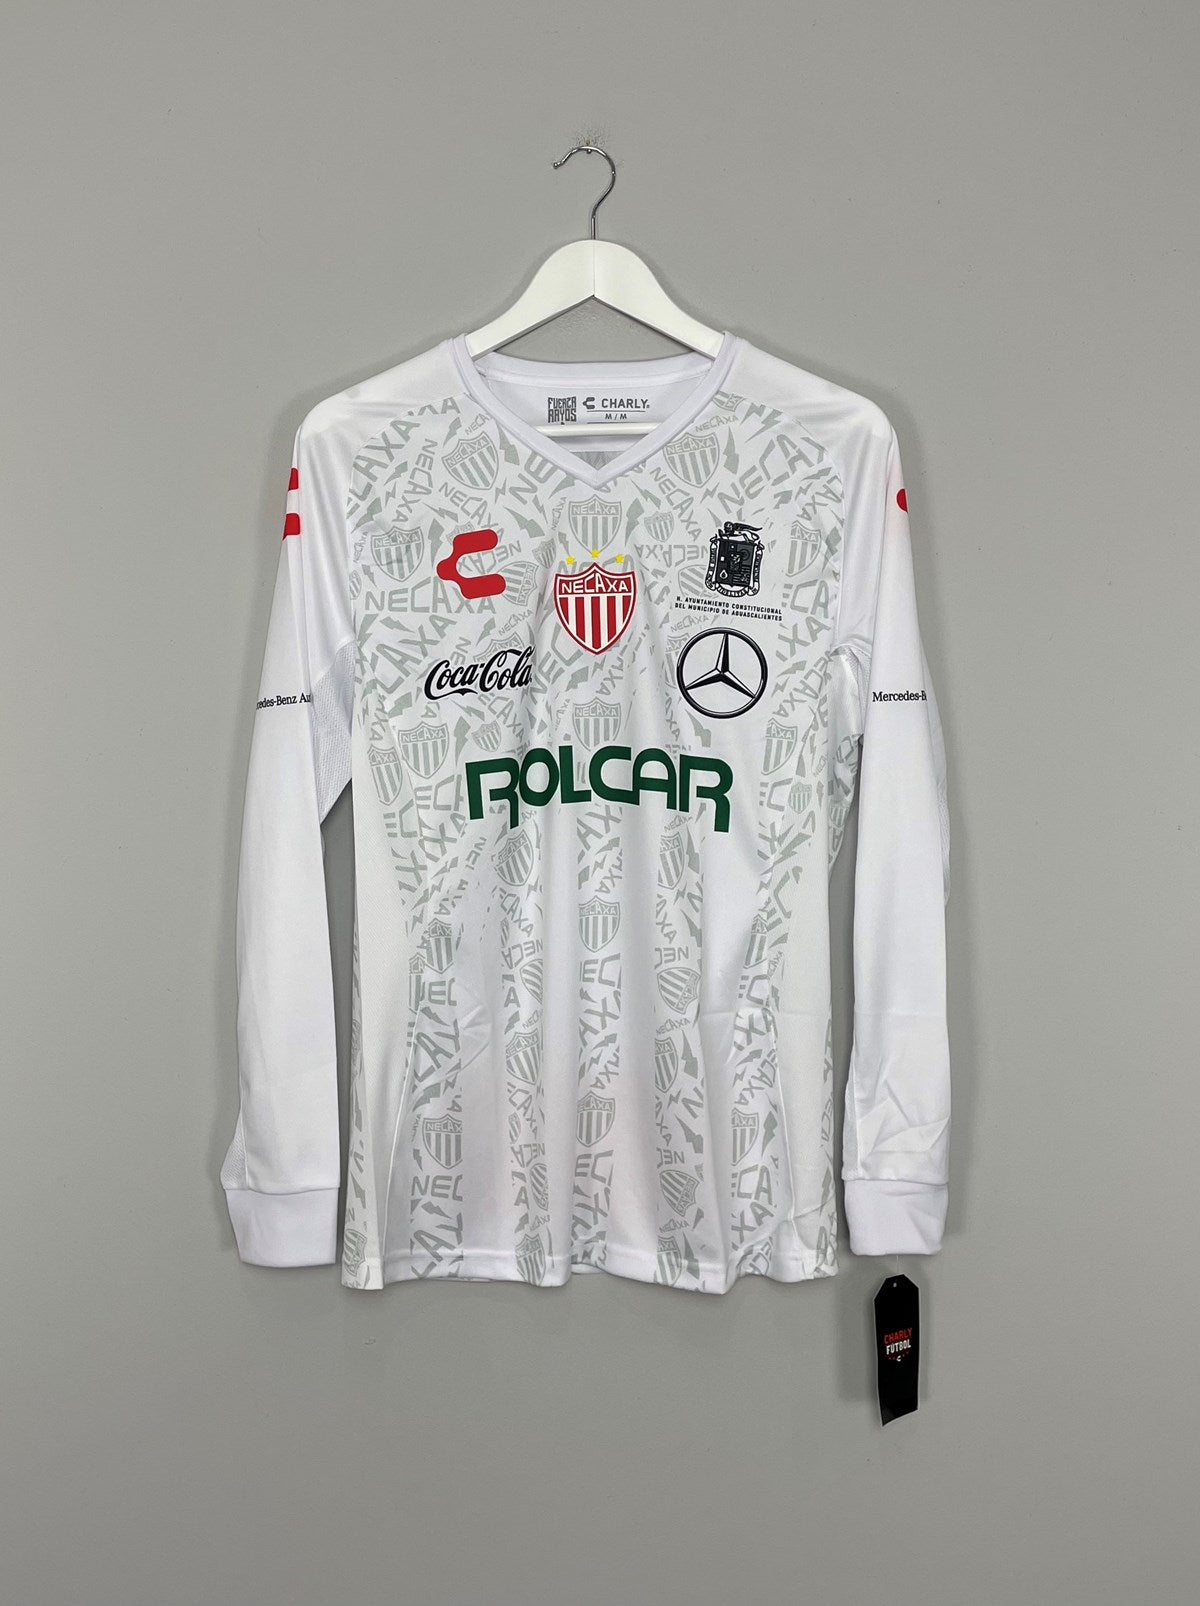 2019/20 NECAXA *BNWT* L/S HOME SHIRT (MULTIPLE SIZES) CHARLY FUTBOL, XL / Other Mexican Clubs / 2019